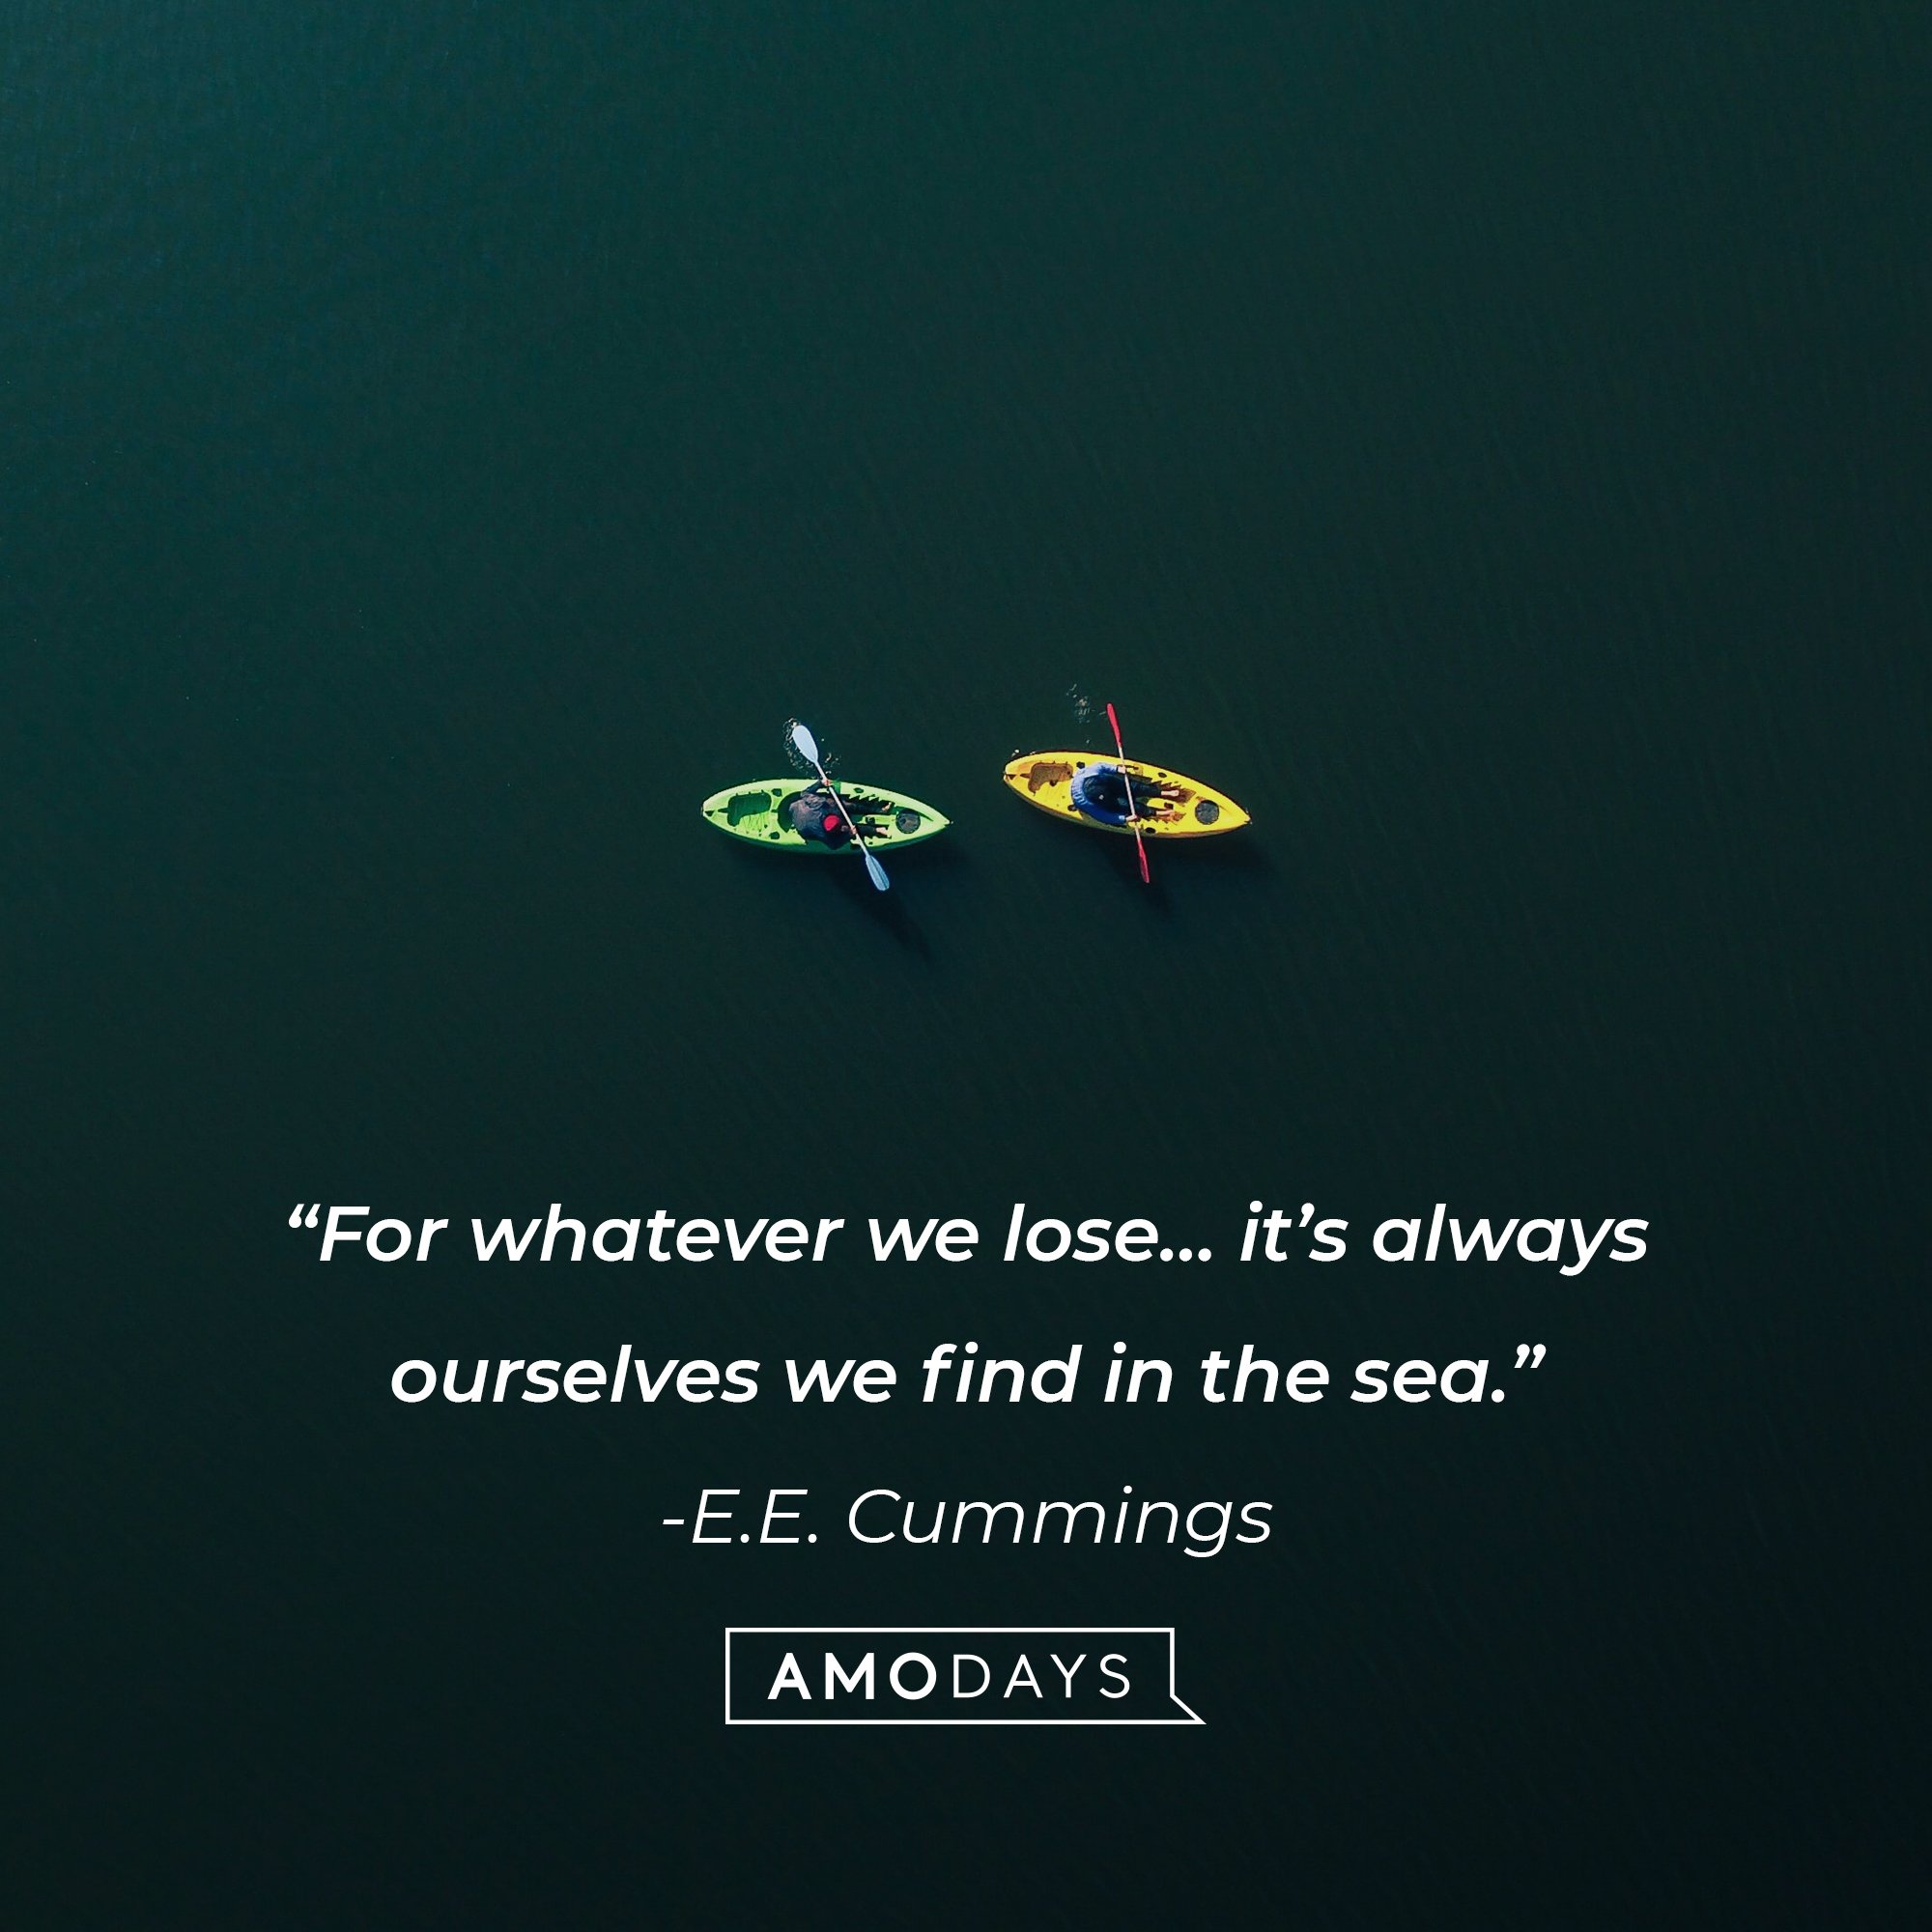 E.E. Cummings’ quote: “For whatever we lose… it’s always ourselves we find in the sea.” | Image: AmoDays